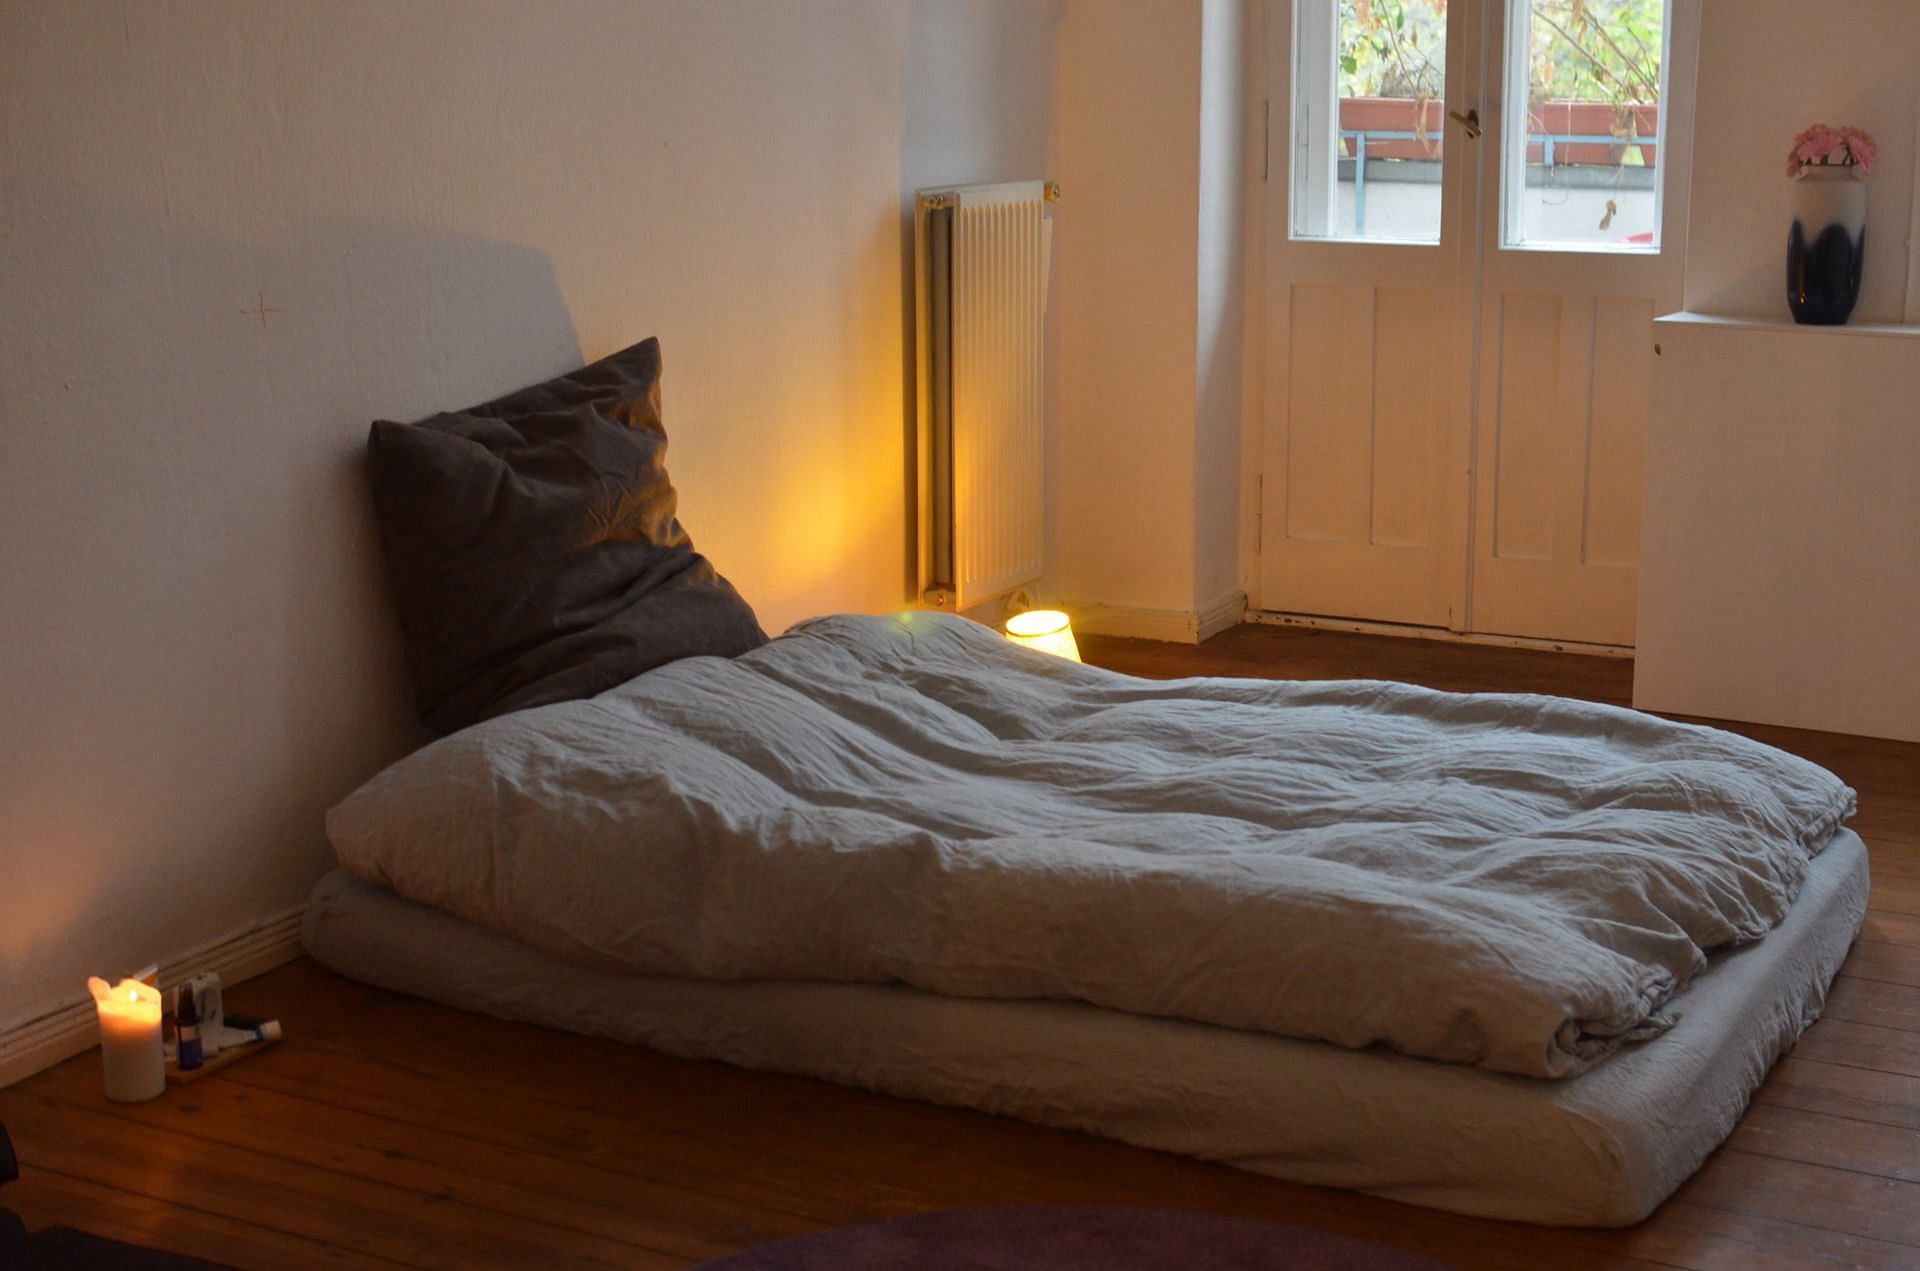 Benefits of clean bed sheets for comfort (image sourced via Pexels / Photo by Skylar)